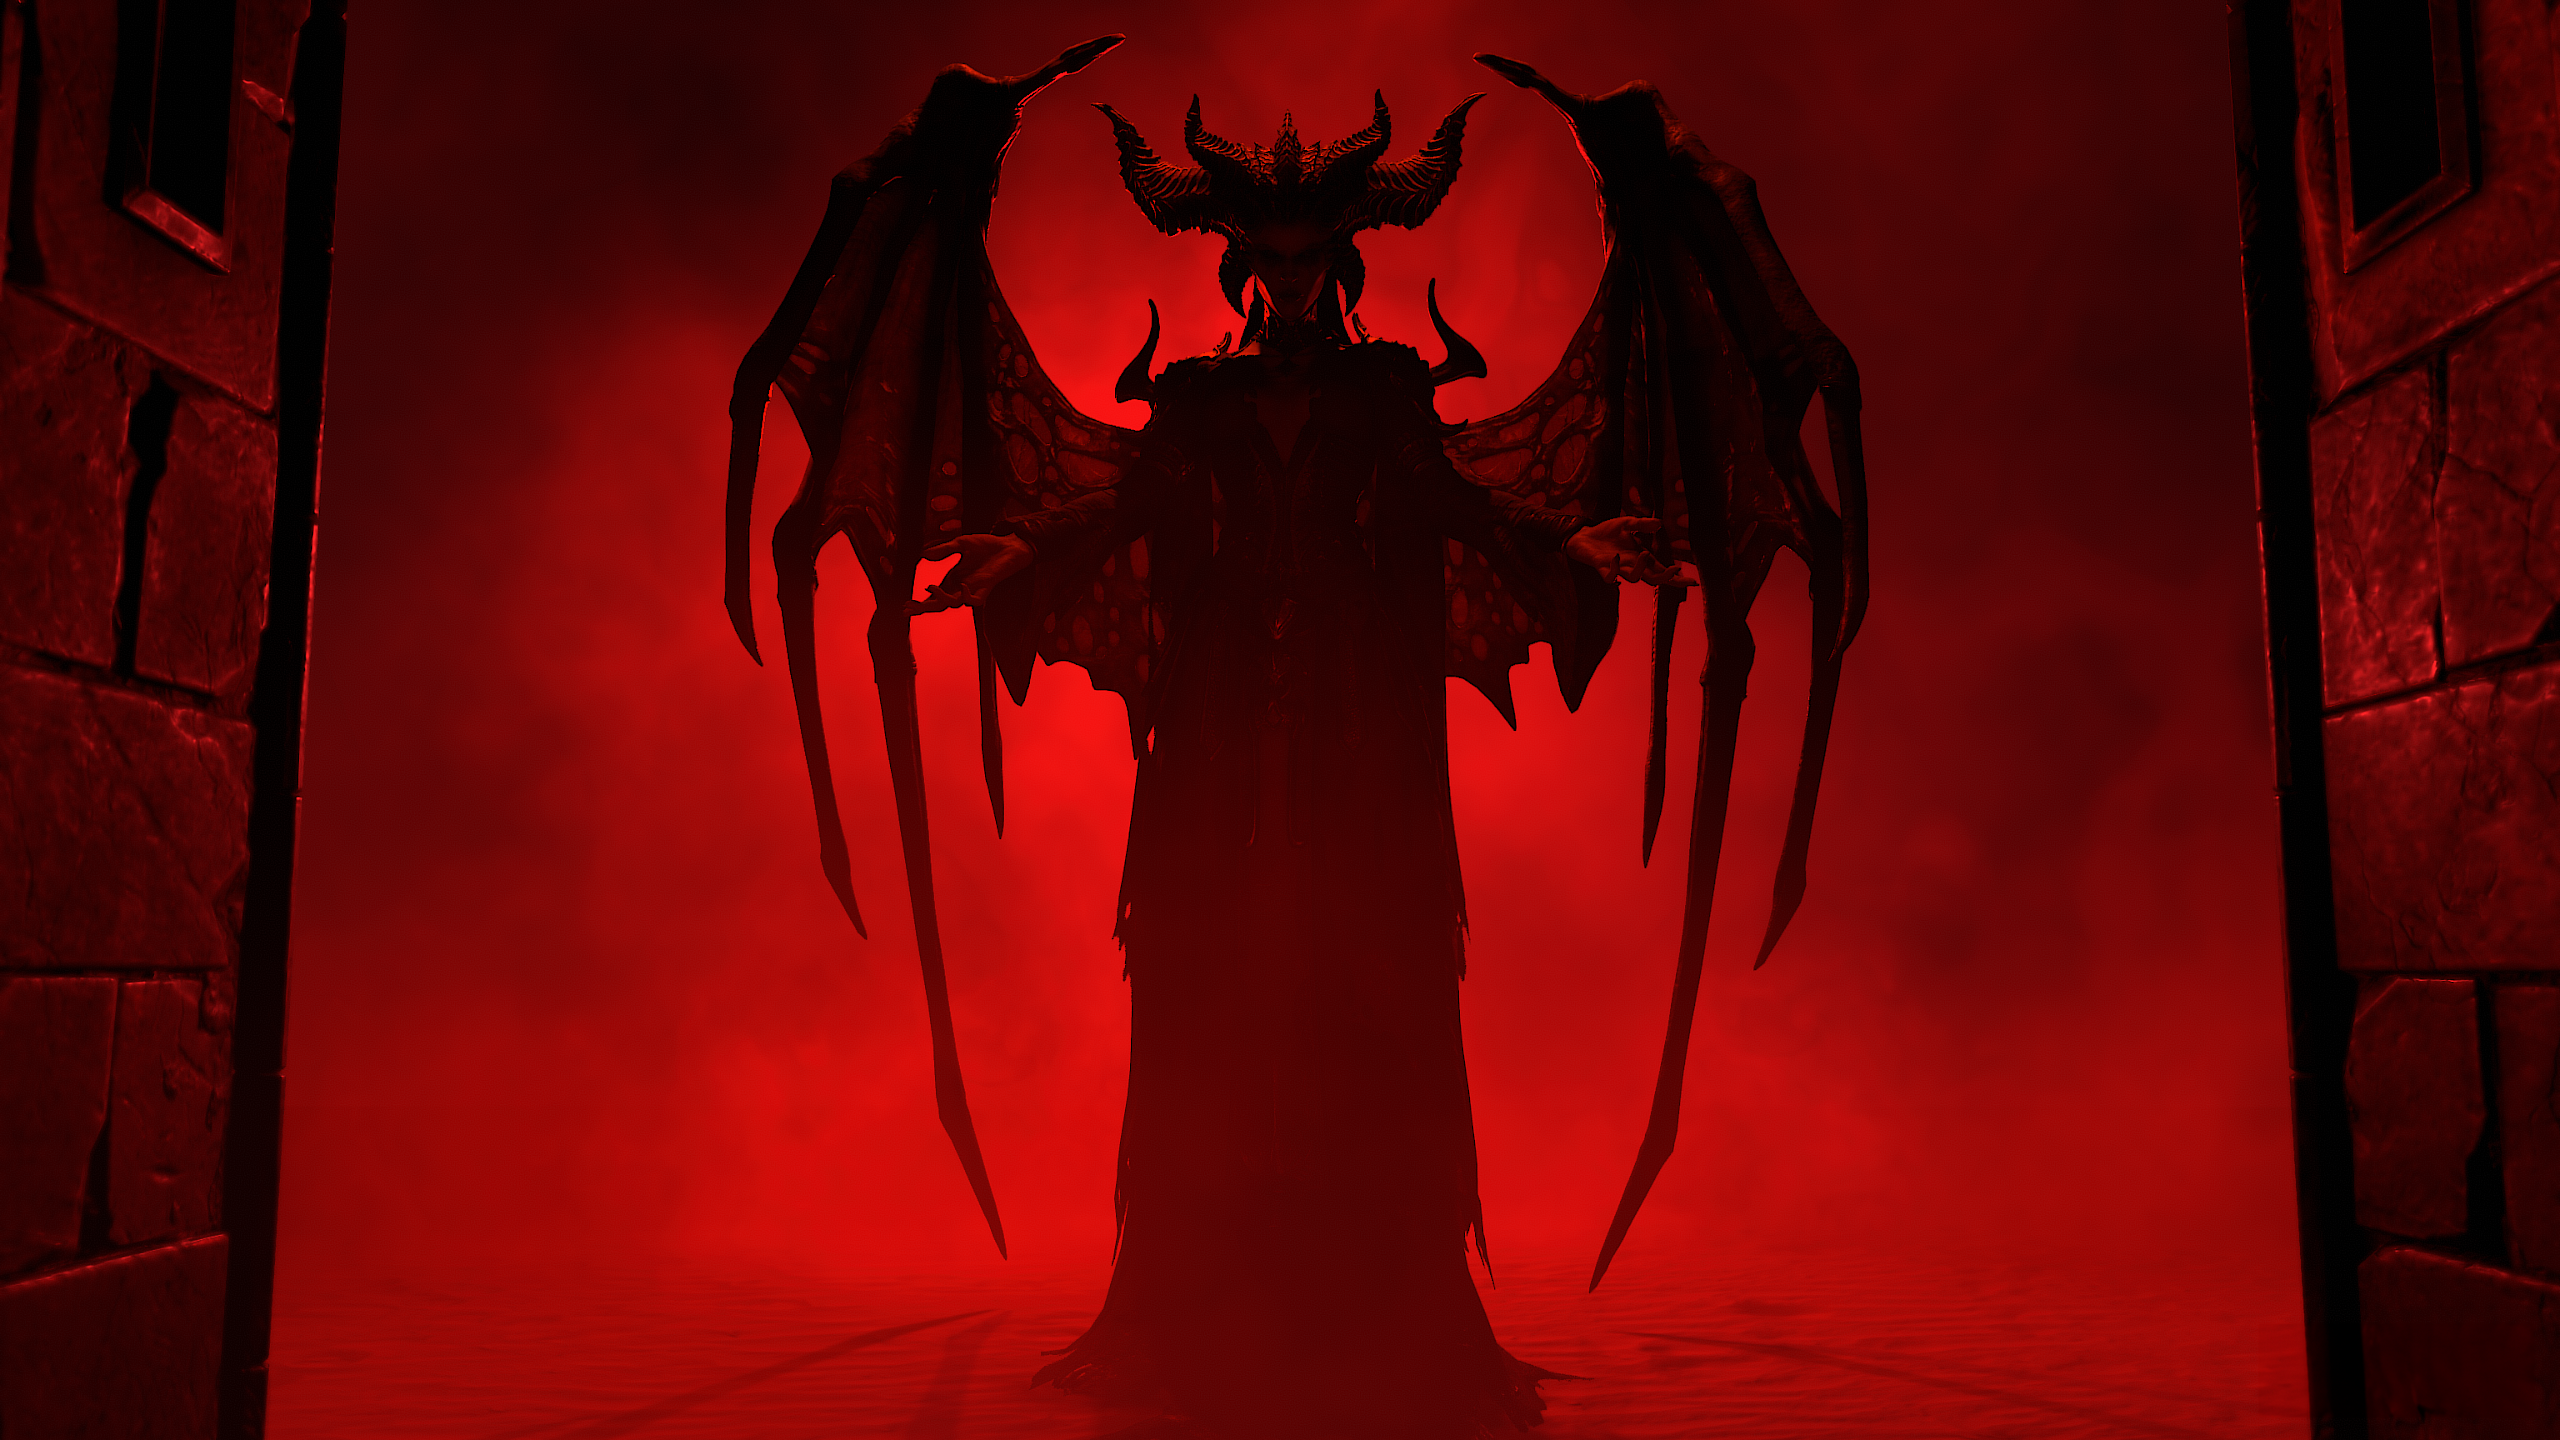 Video Games Diablo IV Red Background Diablo Video Game Characters Lilith Diablo Horns Standing Video 2560x1440